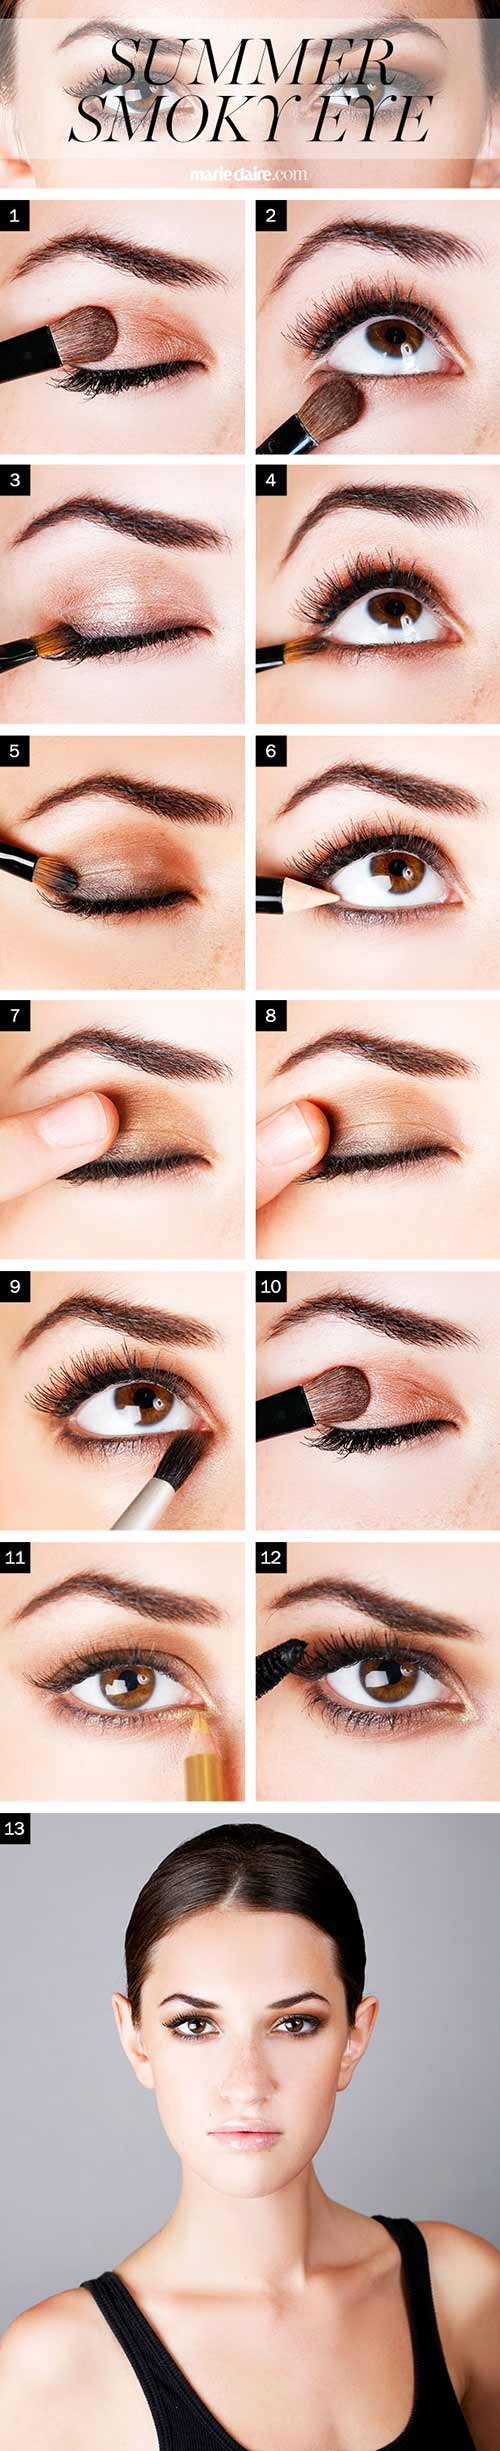 Purple Smokey Eye Makeup For Brown Eyes How To Do Smokey Eye Makeup Top 10 Tutorial Pictures For 2019